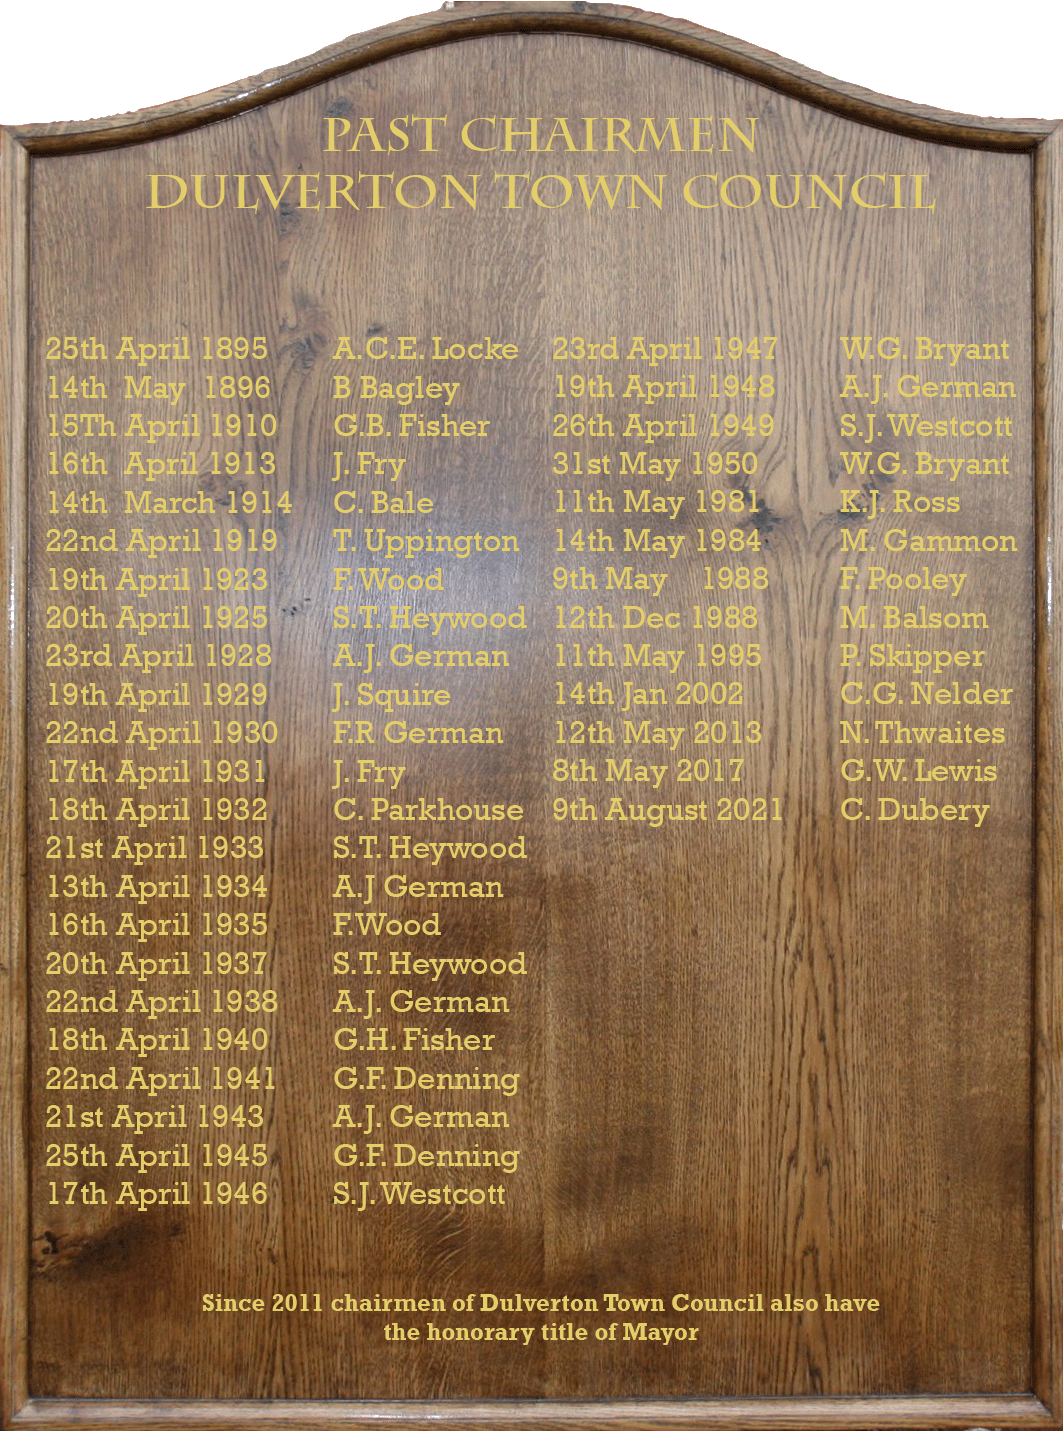 A picture of a board containing a list of past chairmen of Dulverton Town Council